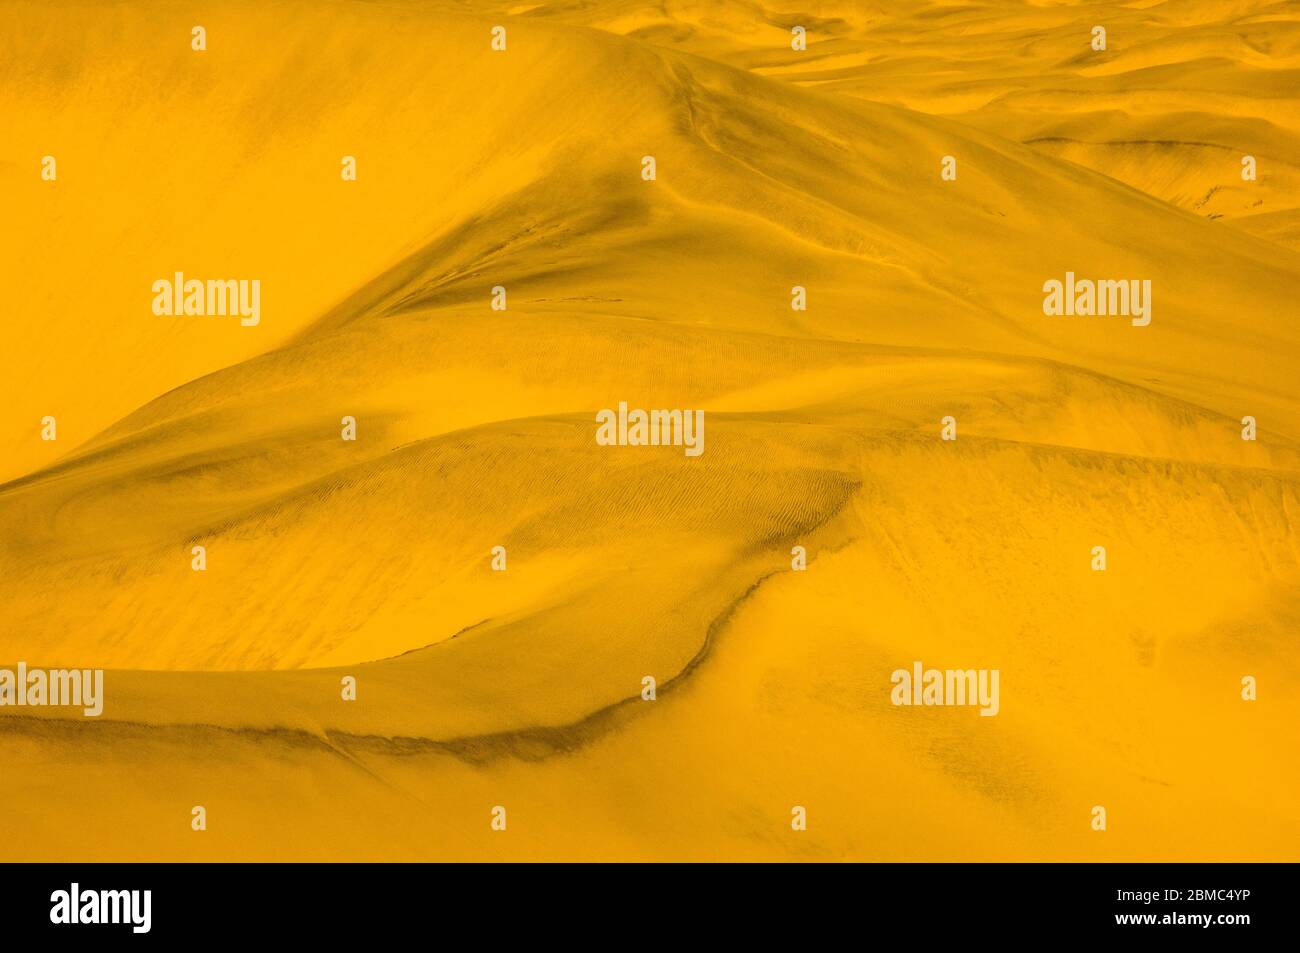 impressive sand dunes with waves and patterns Stock Photo